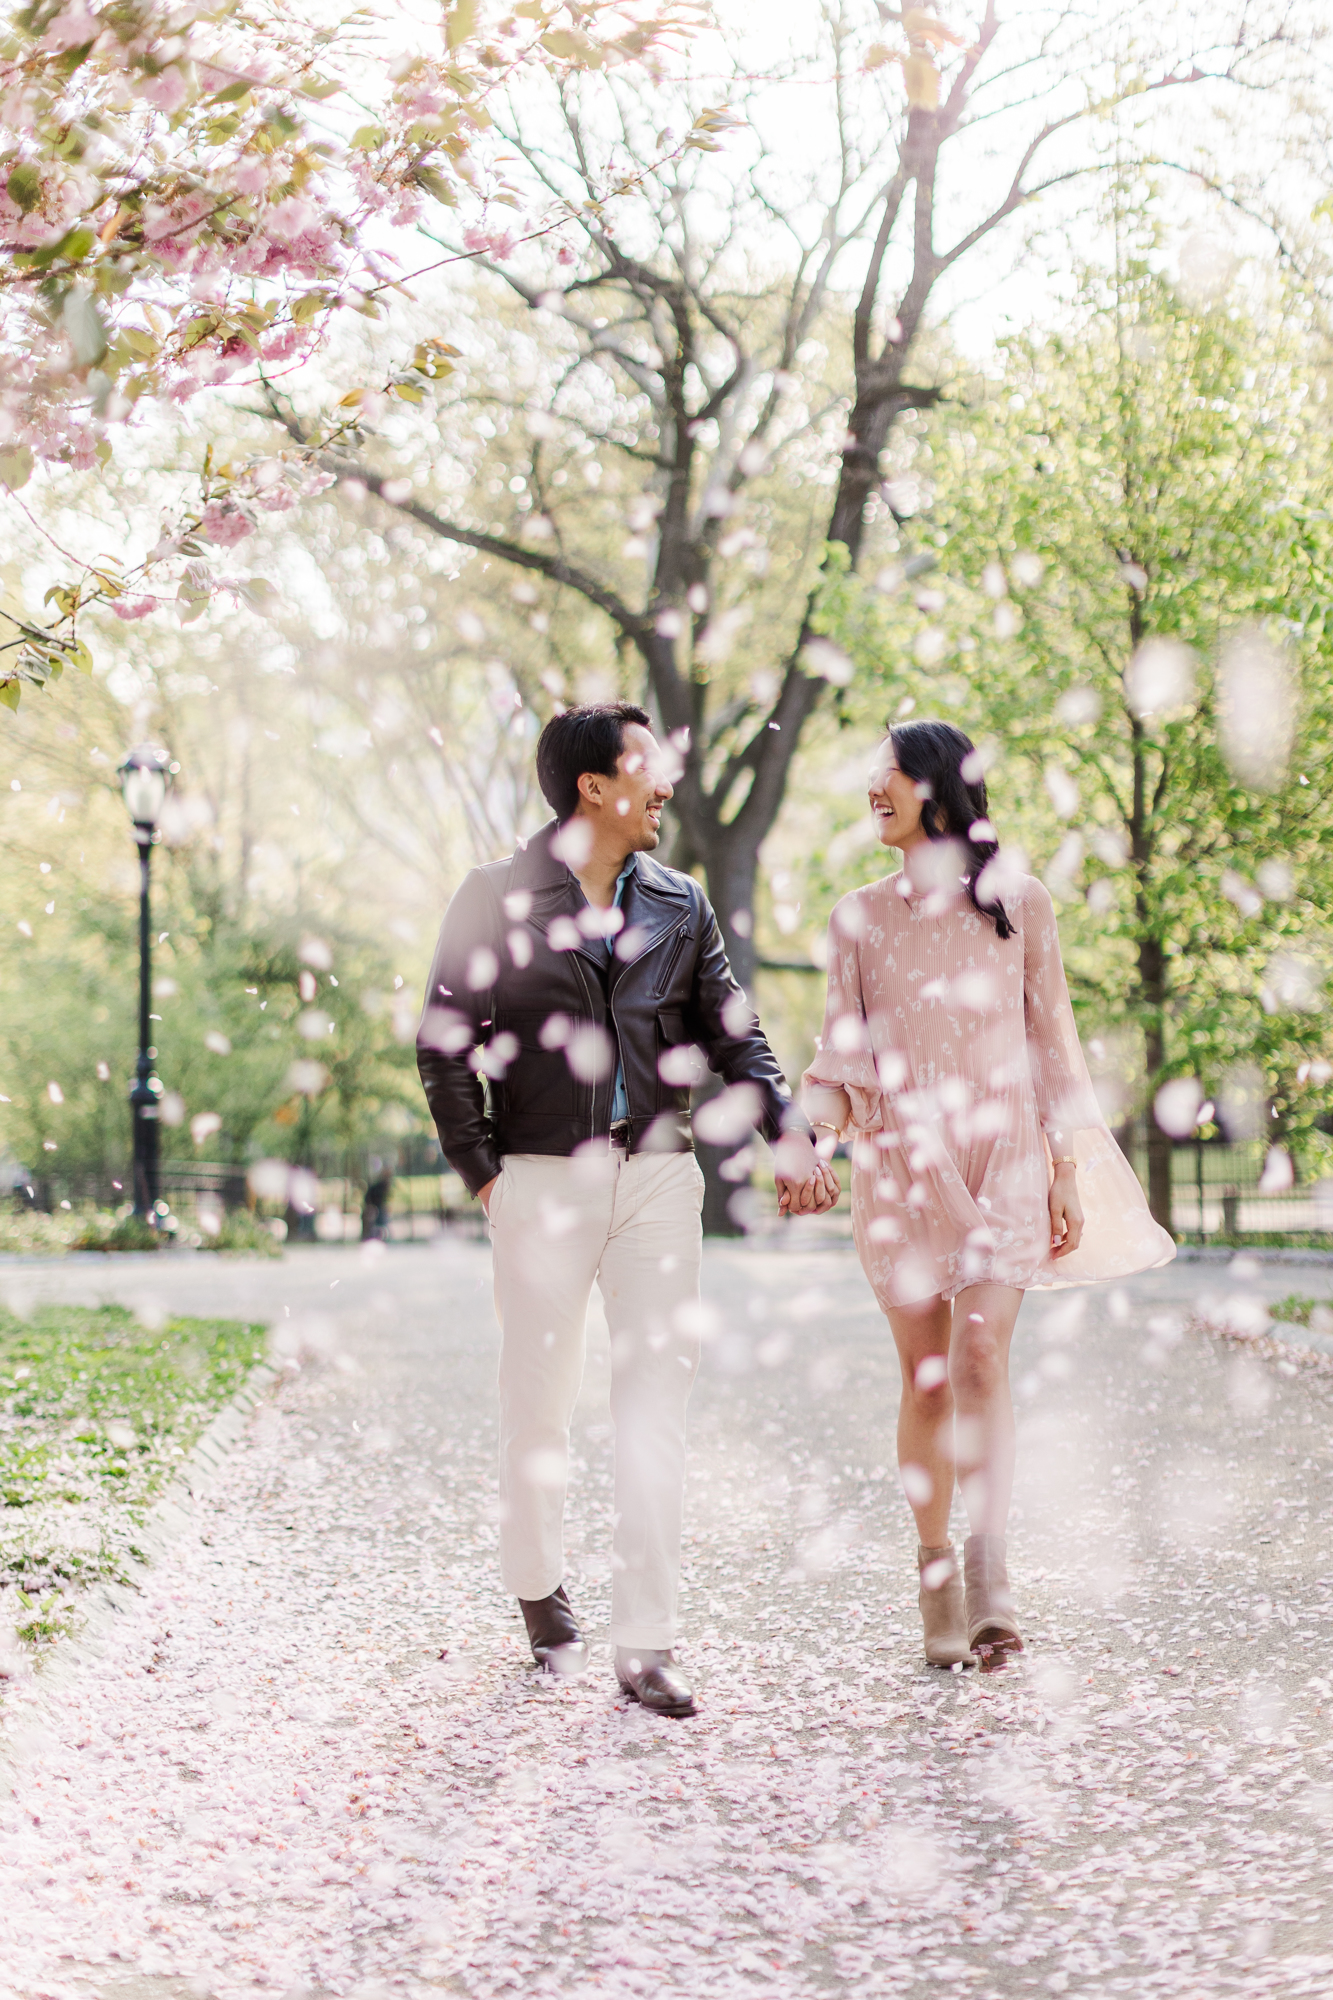 Incredible Engagement Photos With Cherry Blossoms in NYC